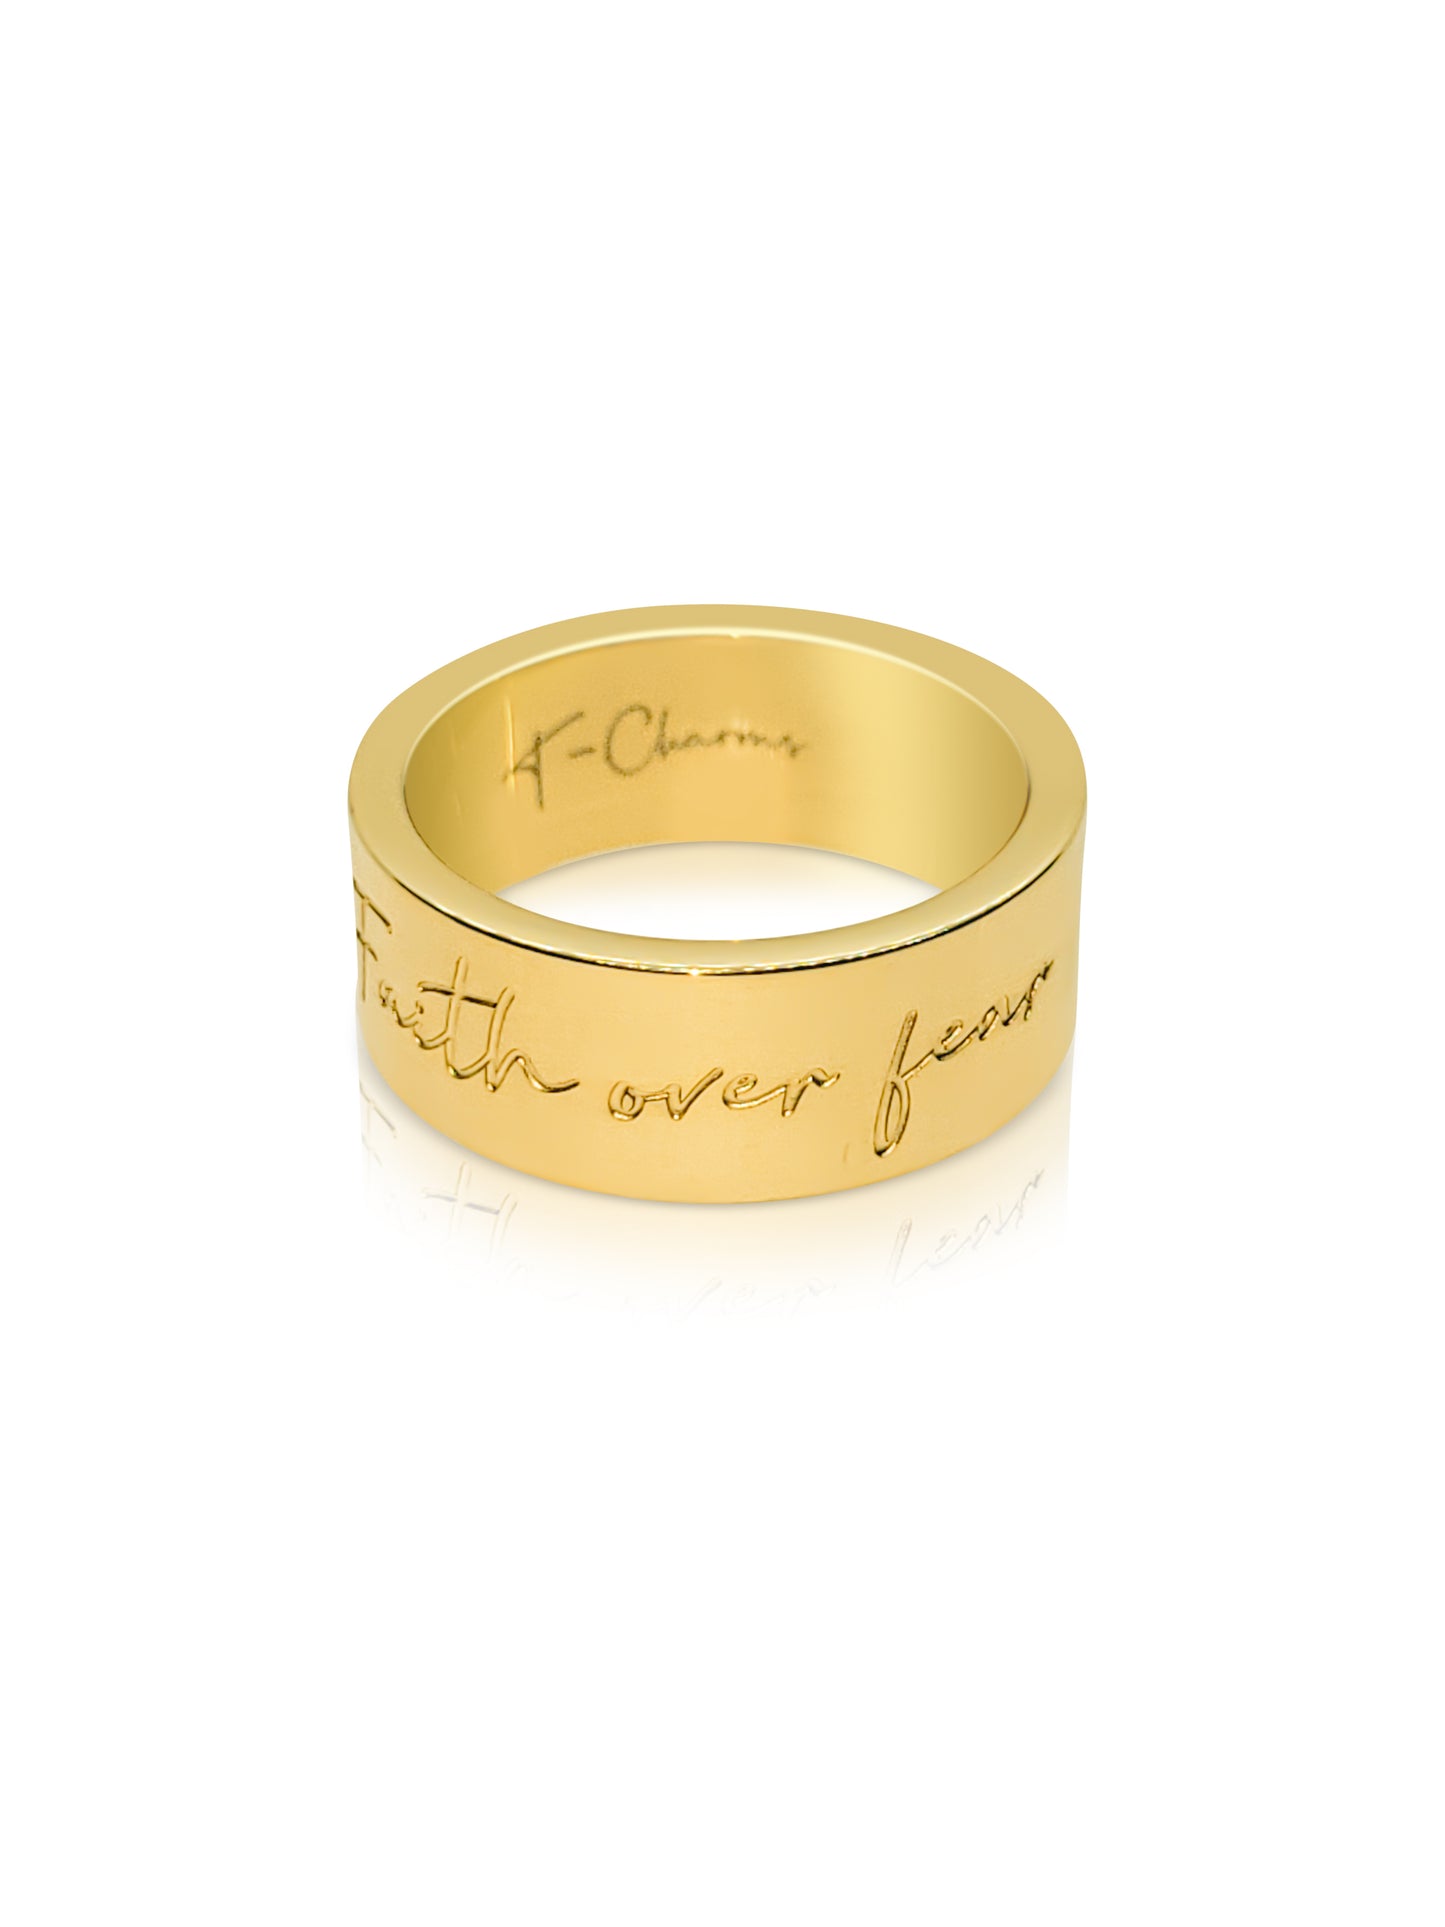 "FAITH OVER FEAR" ENGRAVED INSPIRATIONAL RING